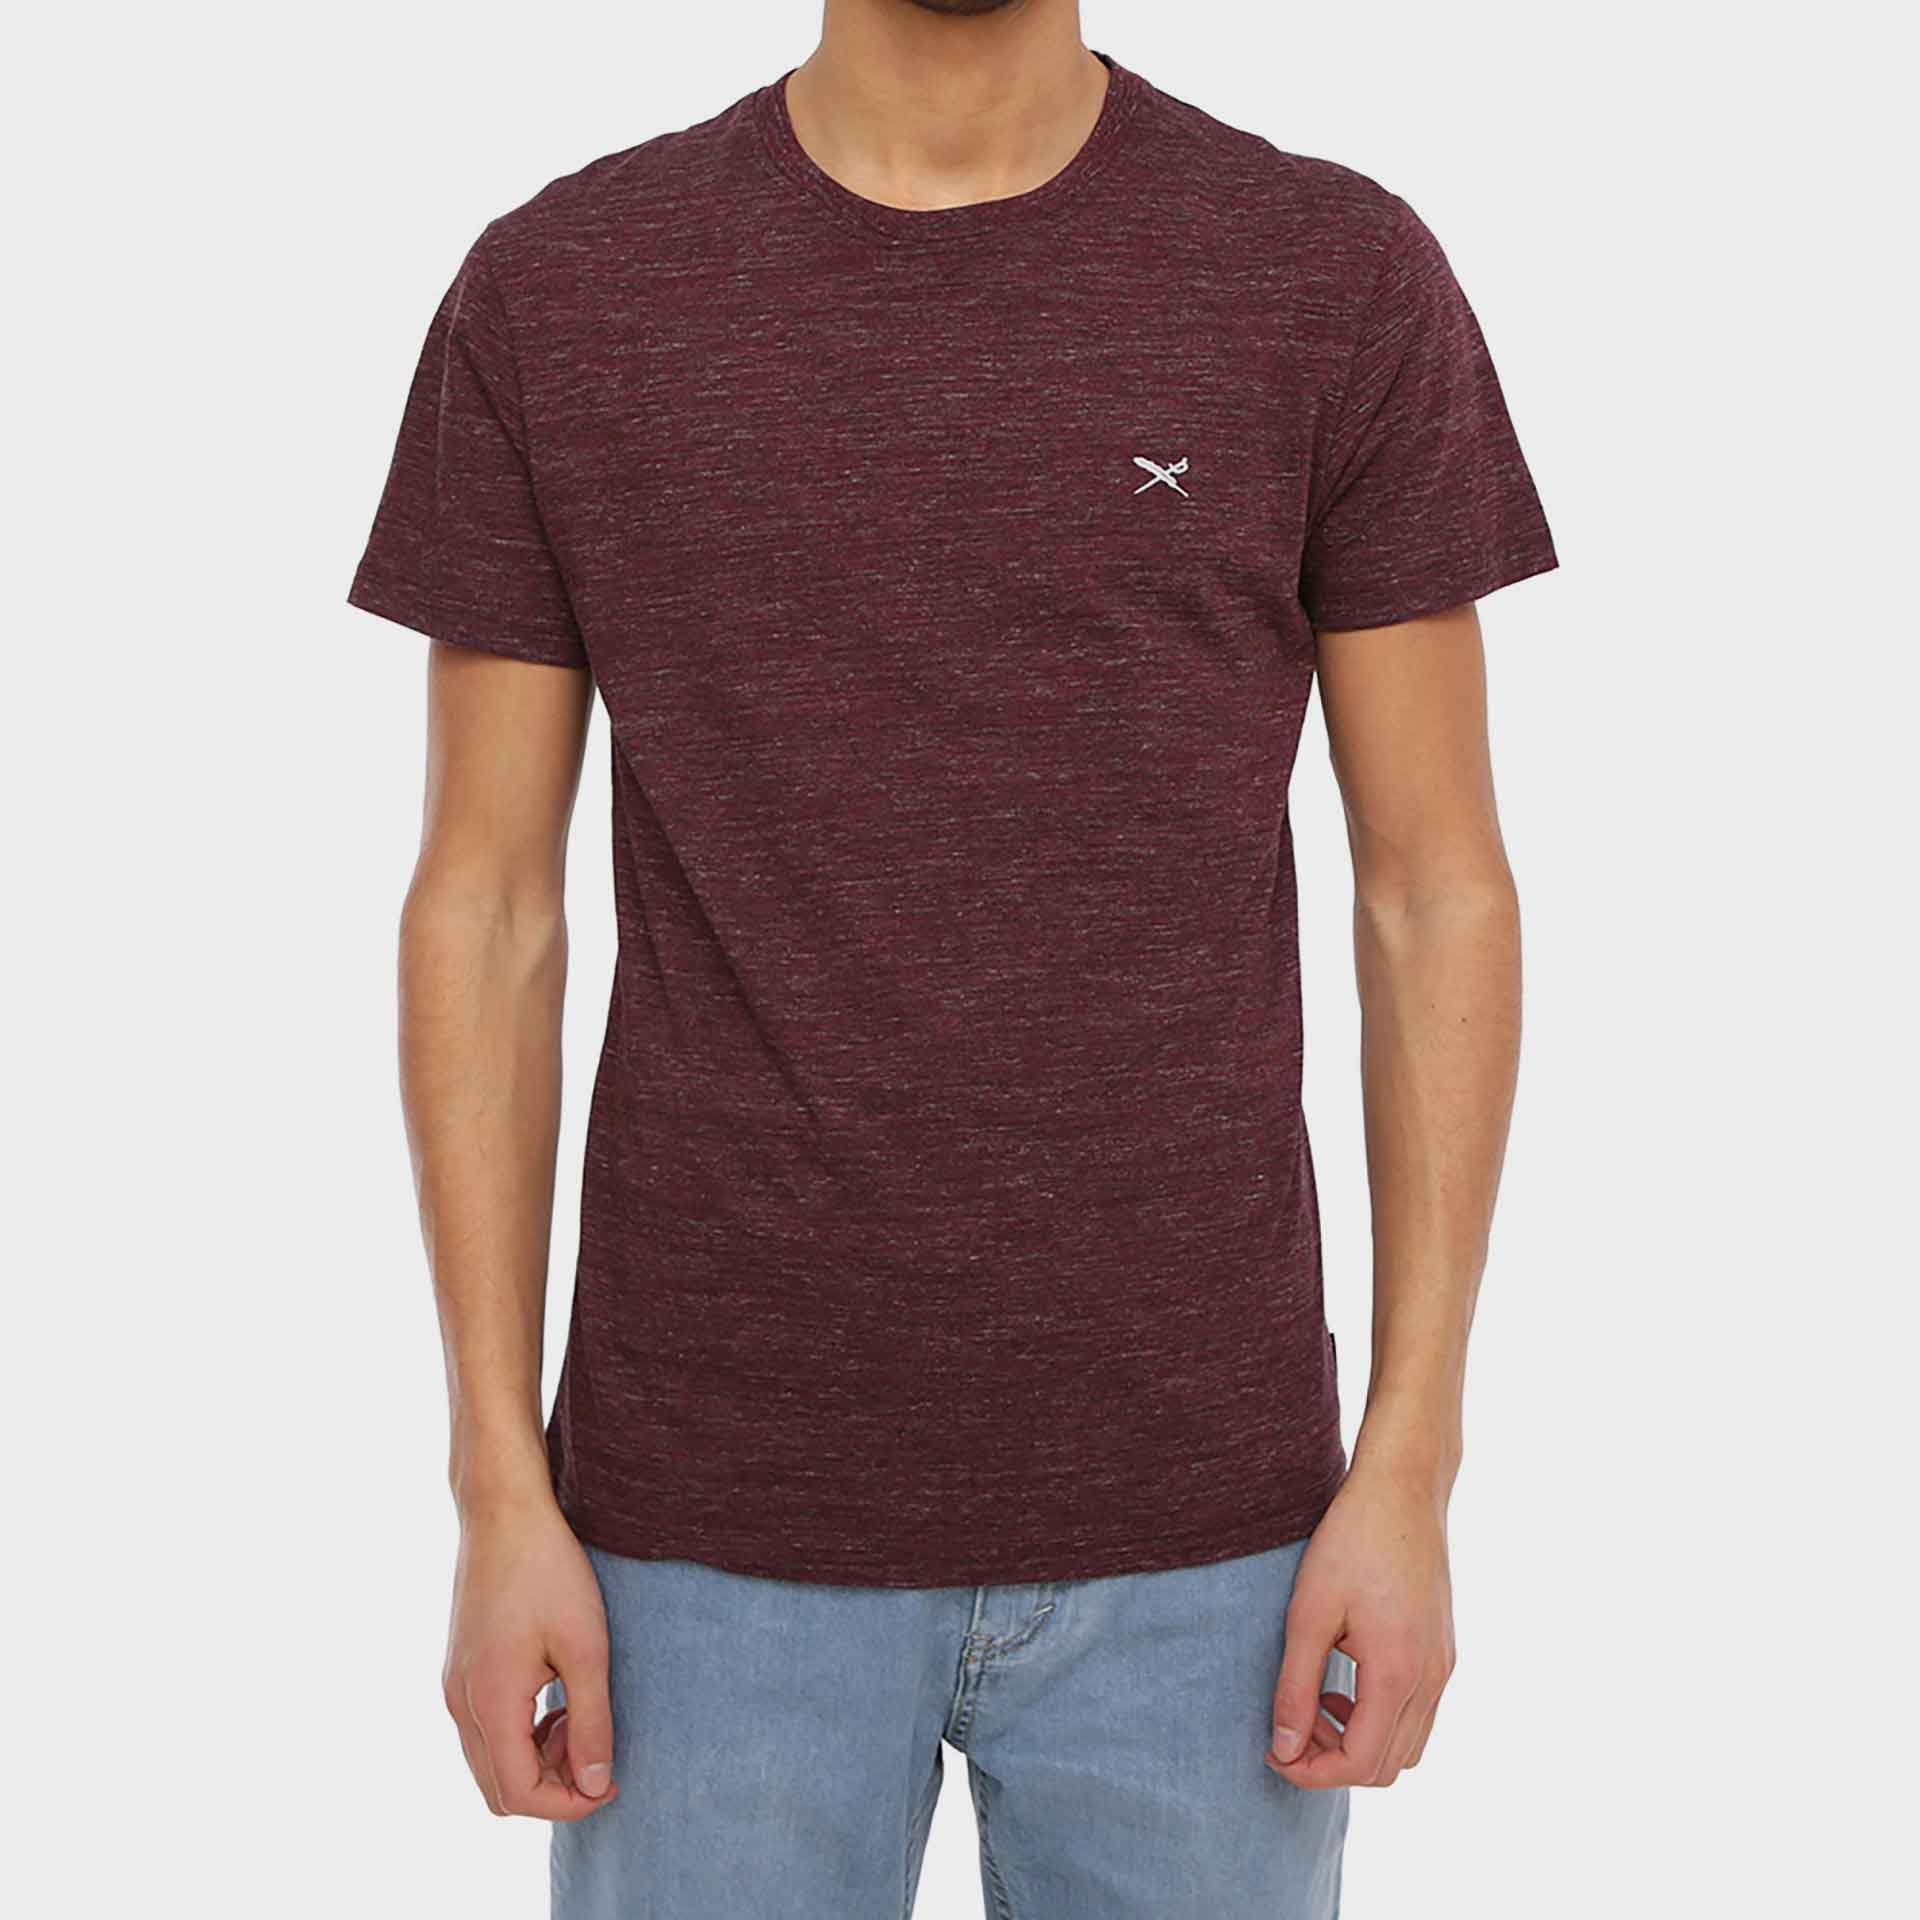 Iriedaily Chamisso Light Embroidered T-Shirt Maroon Melange